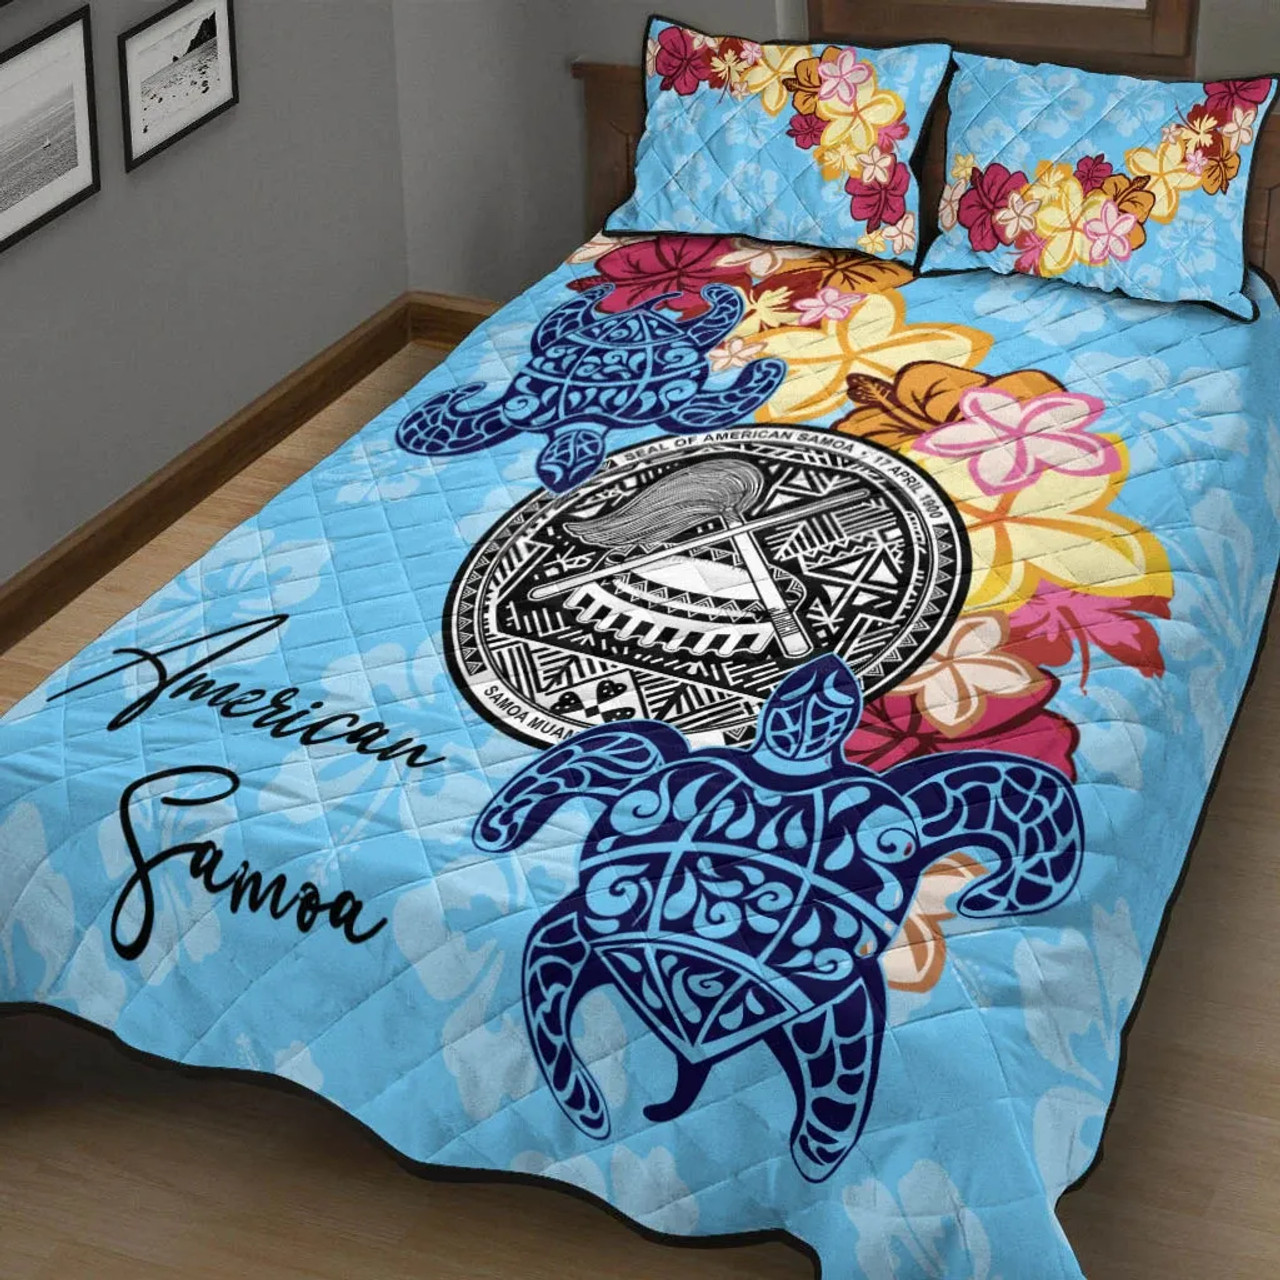 American Samoa Quilt Bed Set - Tropical Style 5